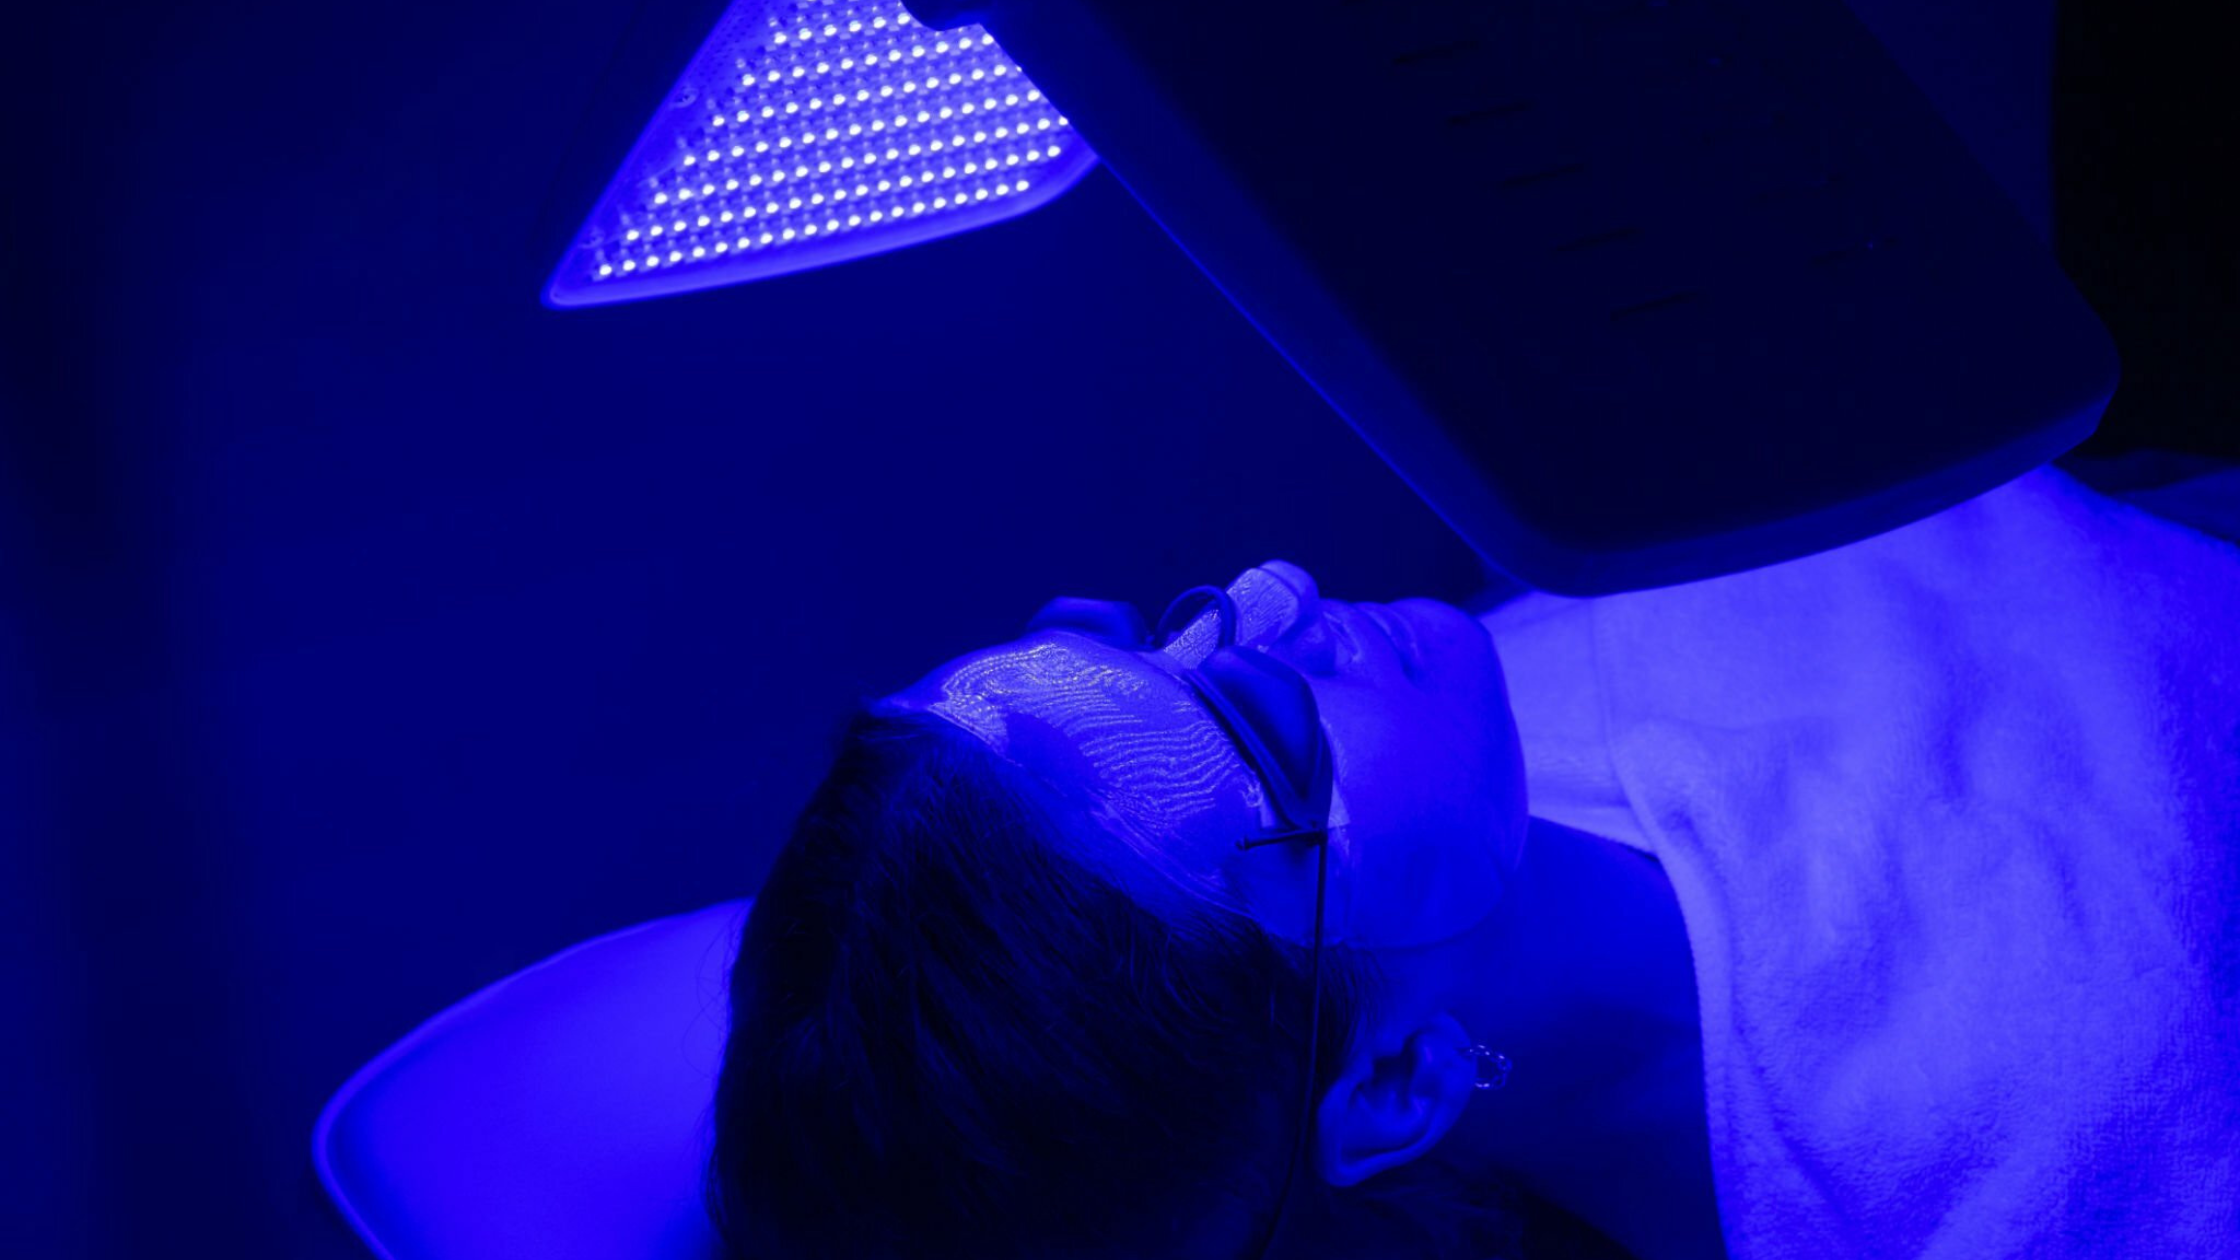 Should you try Phototherapy for your eczema?